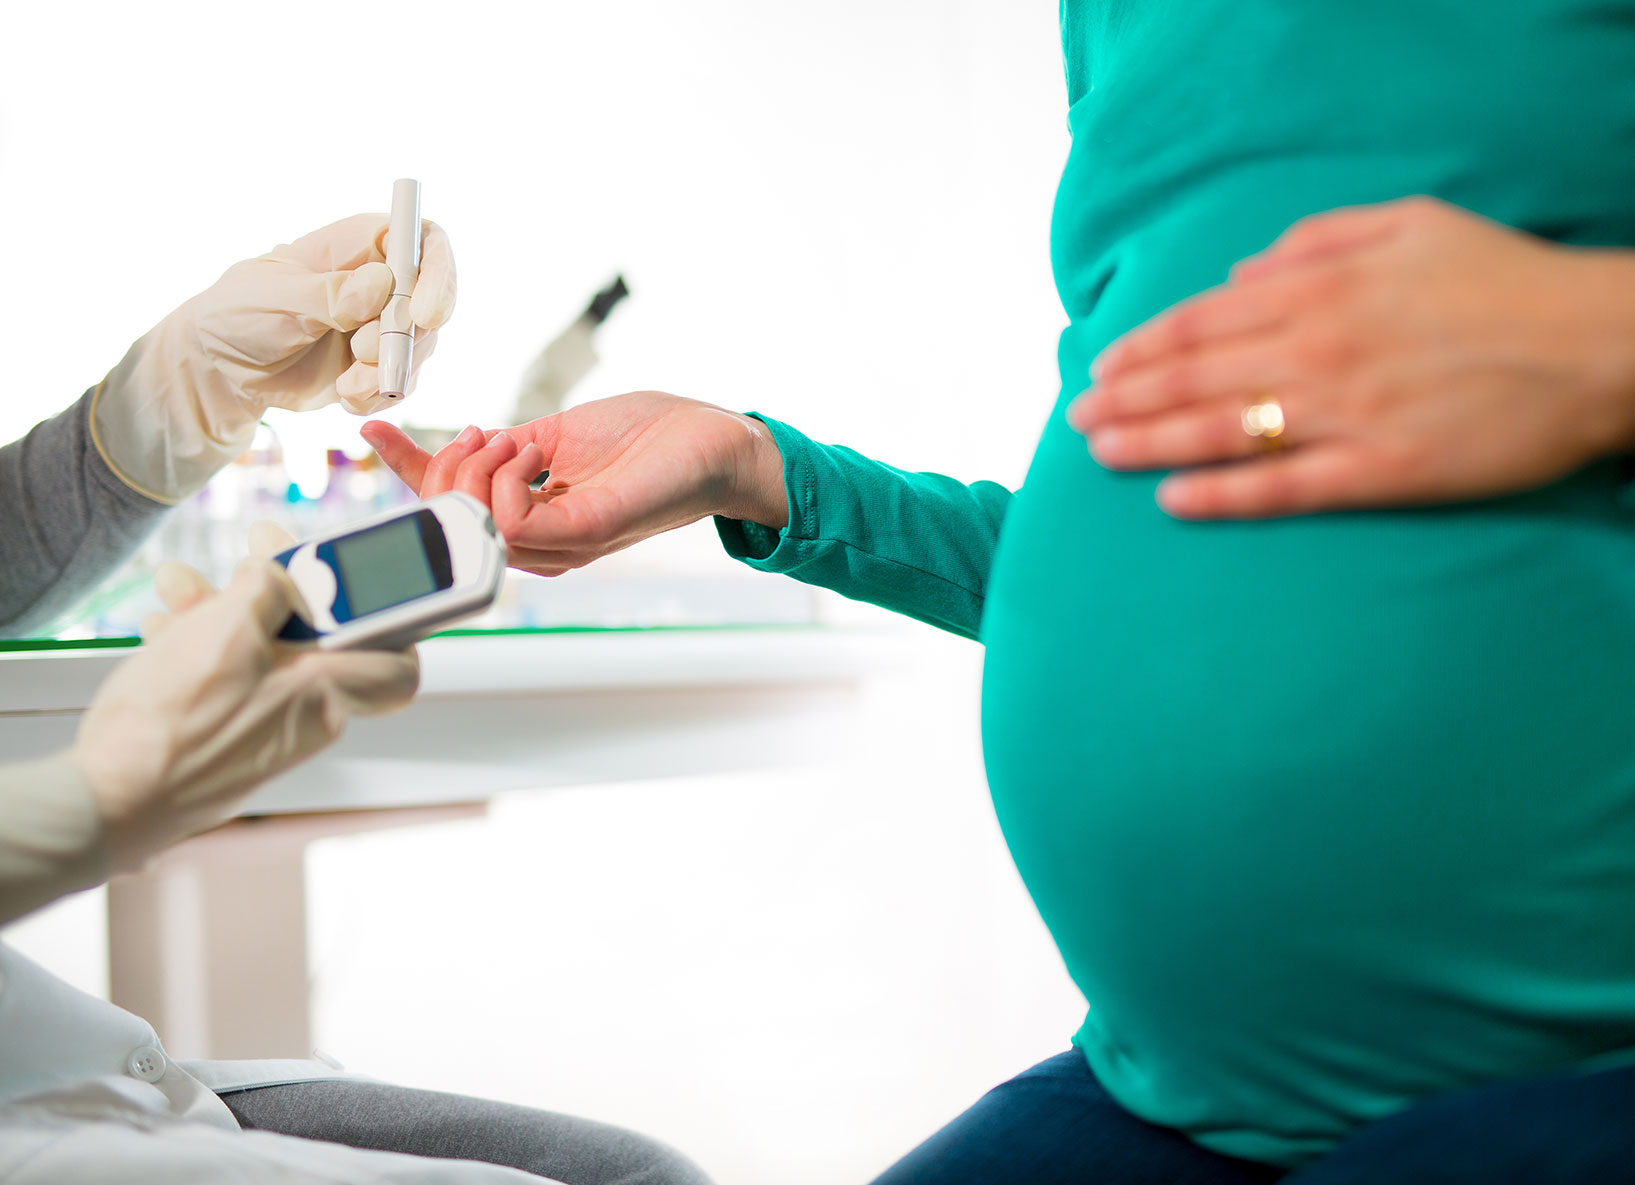 Obesity reduces chances of conception - Healthy Life Style Trends